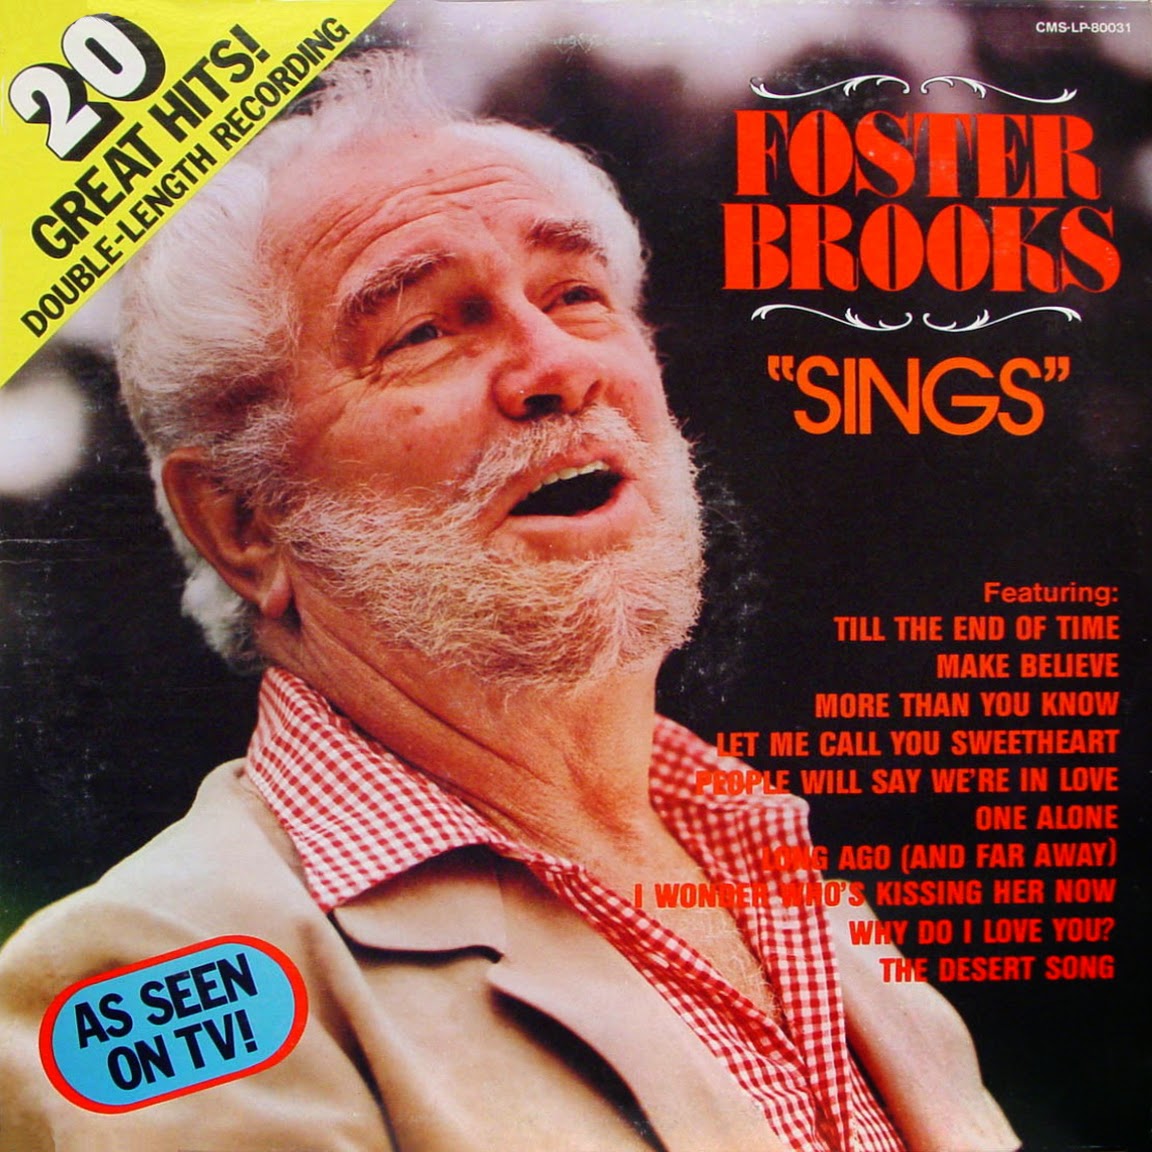 best-pictures-of-foster-brooks